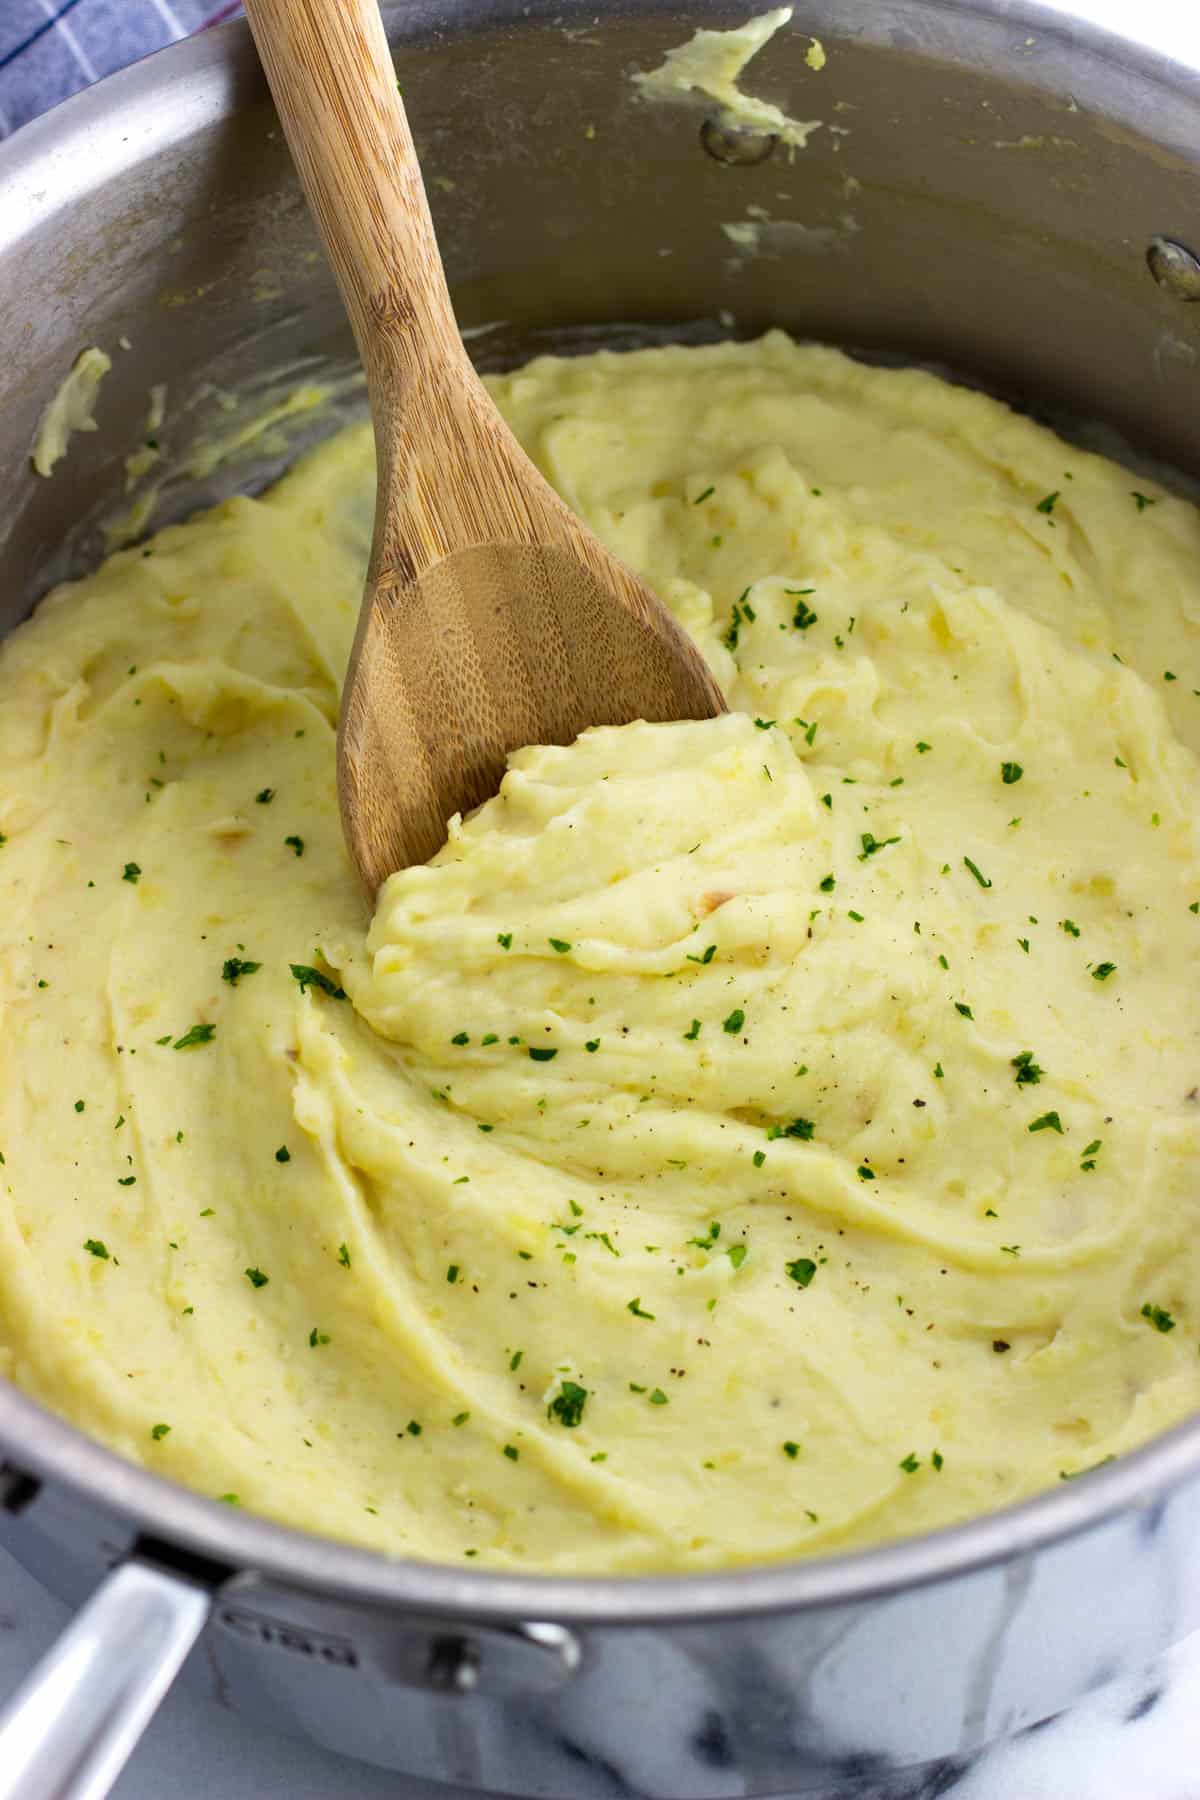 Mashed potatoes in a large metal pan with a wooden spoon.